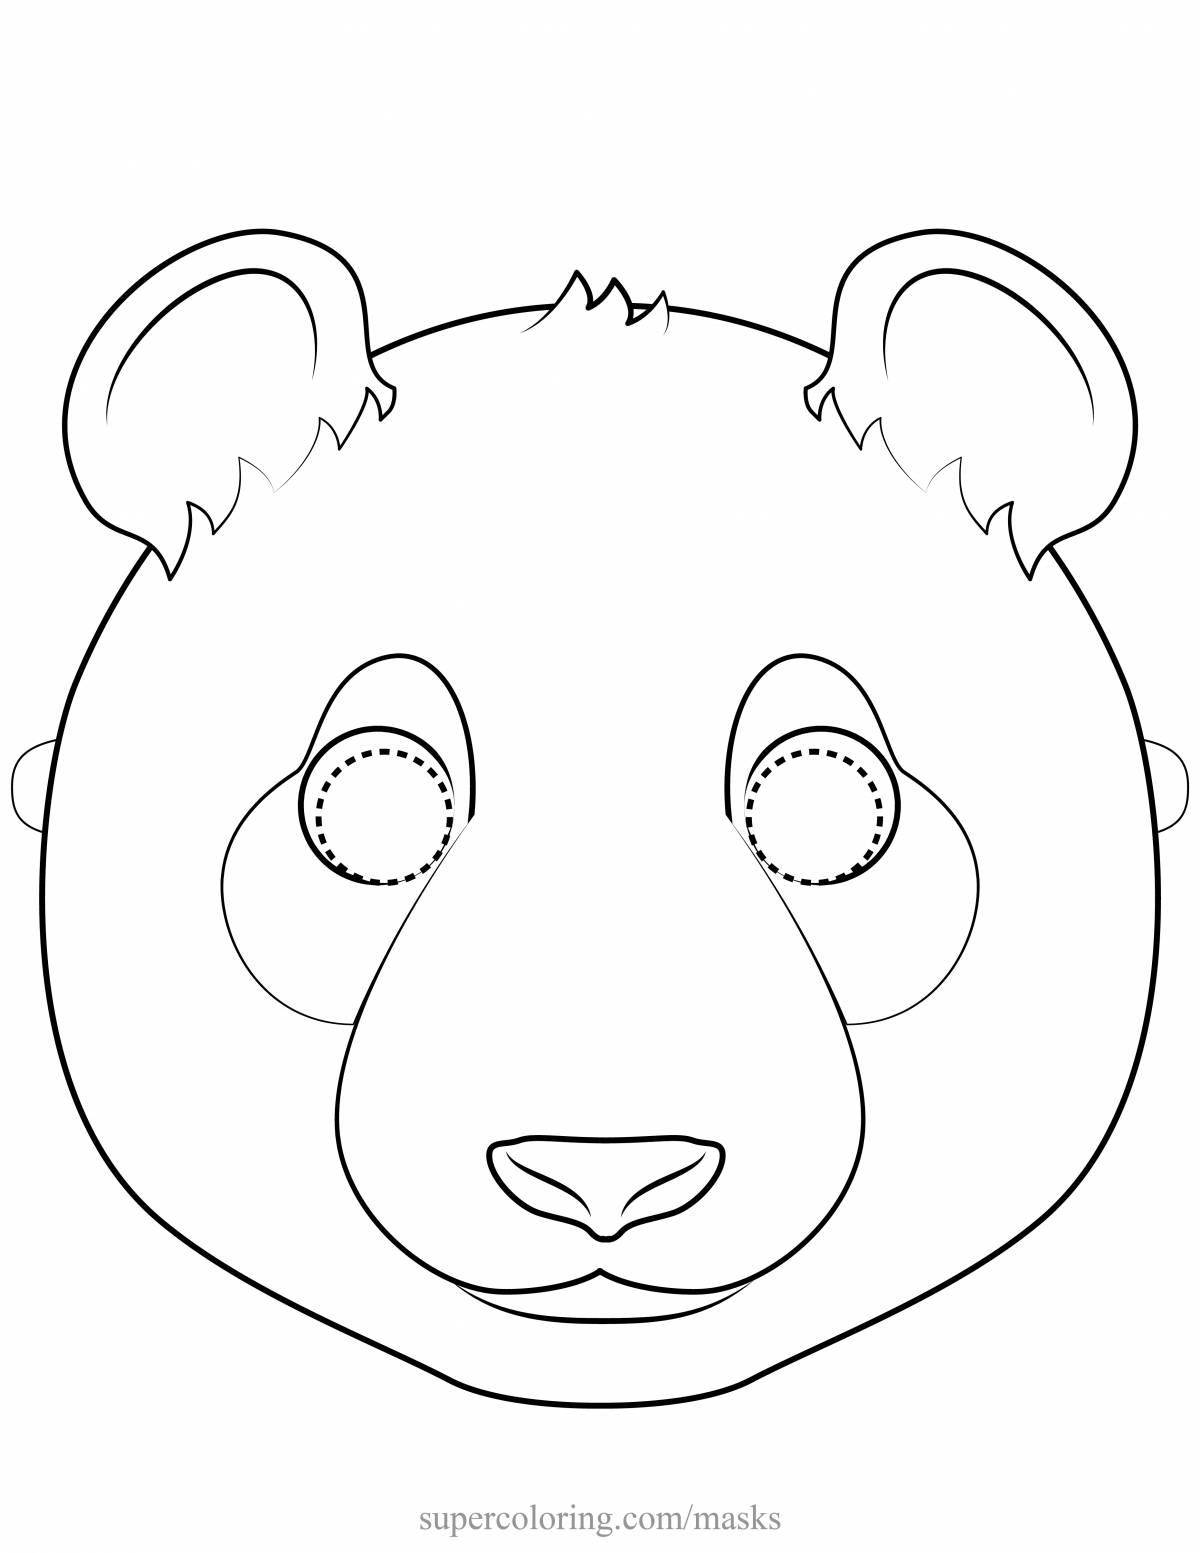 Colorful animal head mask coloring pages for kids